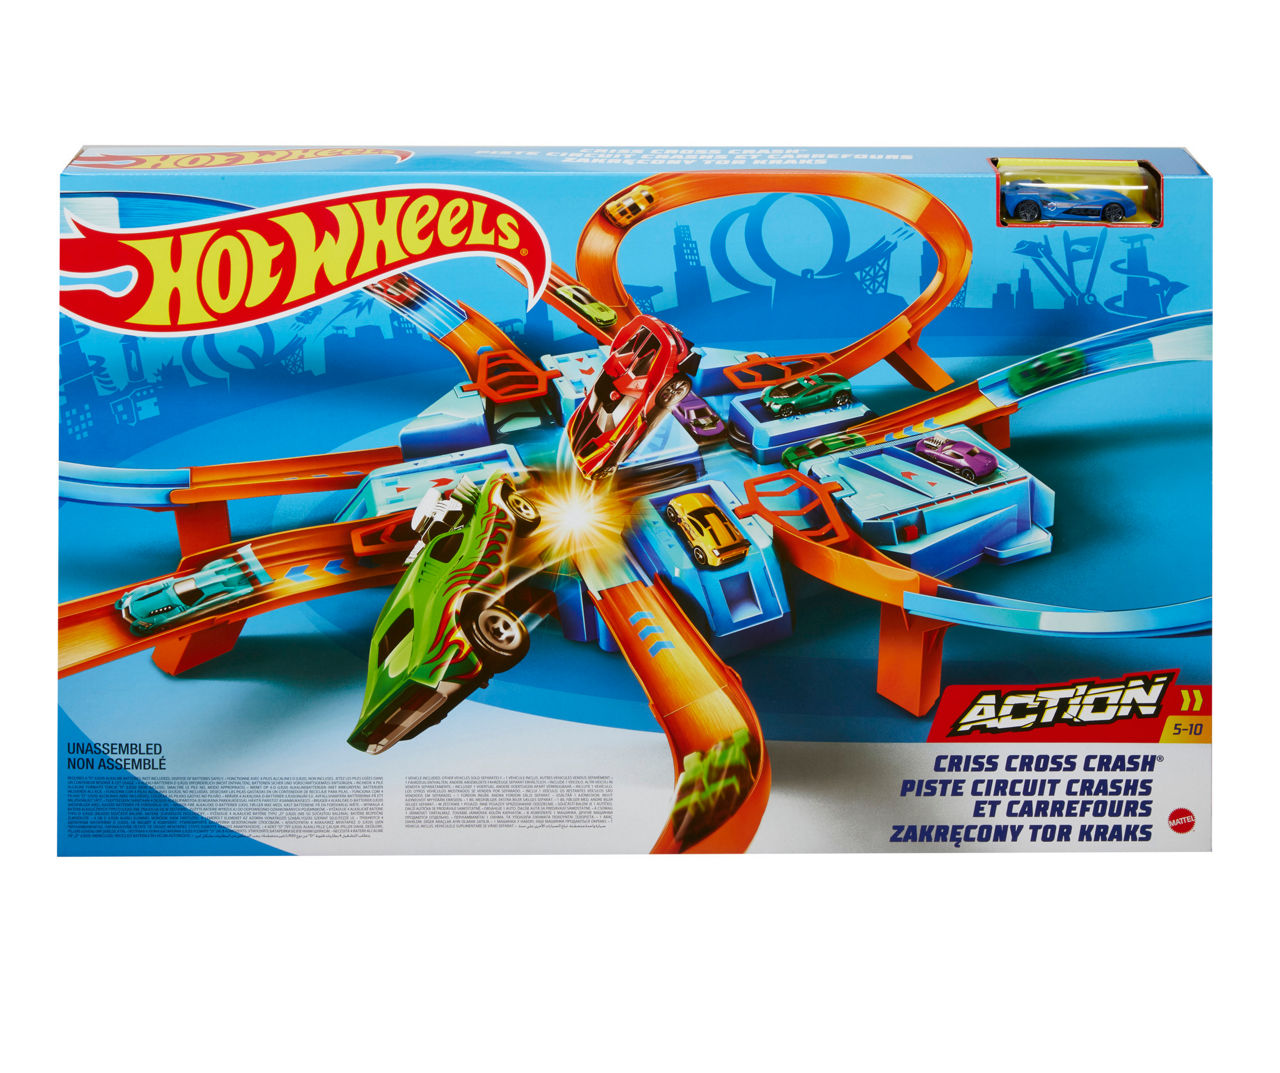  Ultimate Hot Wheels Crashing Action with the Criss Cross Crash  Track Set! [ Exclusive] & Set Of 10 1:64 Scale Toy Trucks And Cars  For Kids And Collectors (Styles May Vary) [